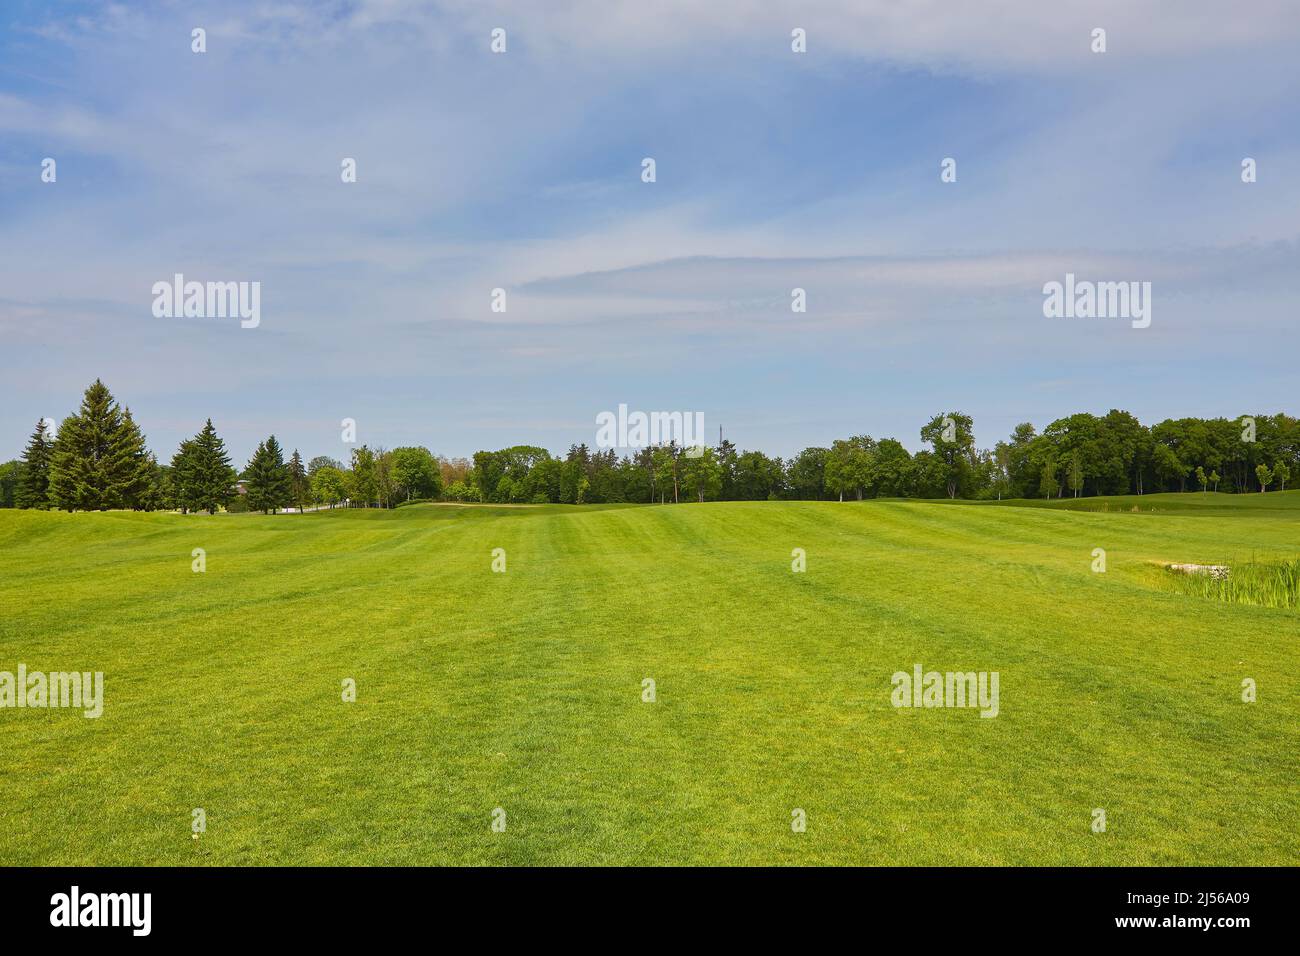 View of Golf Course with beautiful green field. Golf course with a rich green turf beautiful scenery. Stock Photo